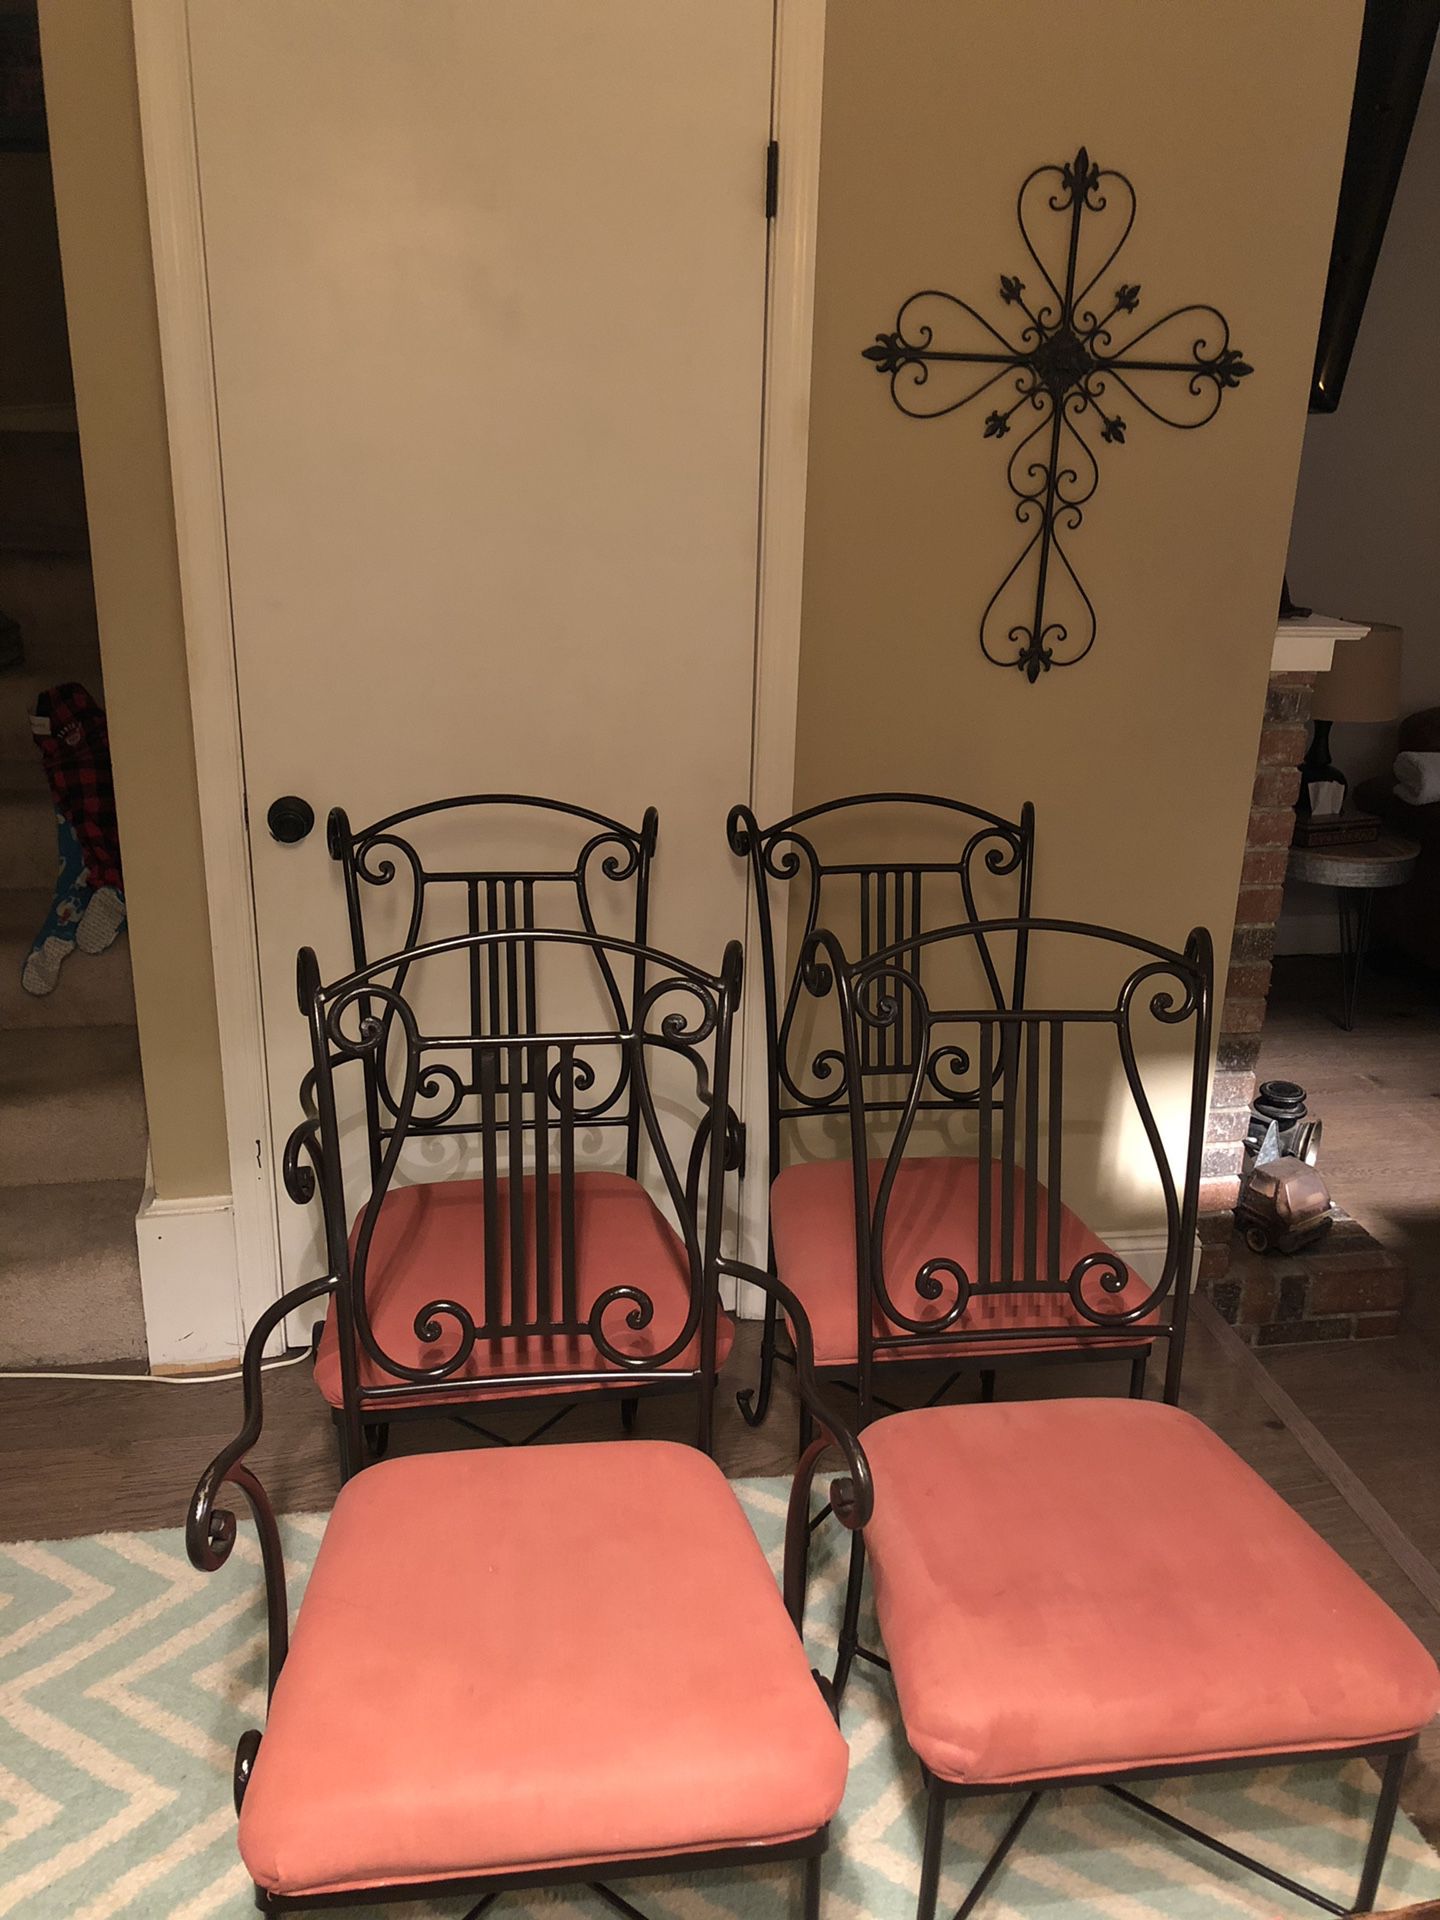 Set of 4 Wrought Iron Dining Chairs